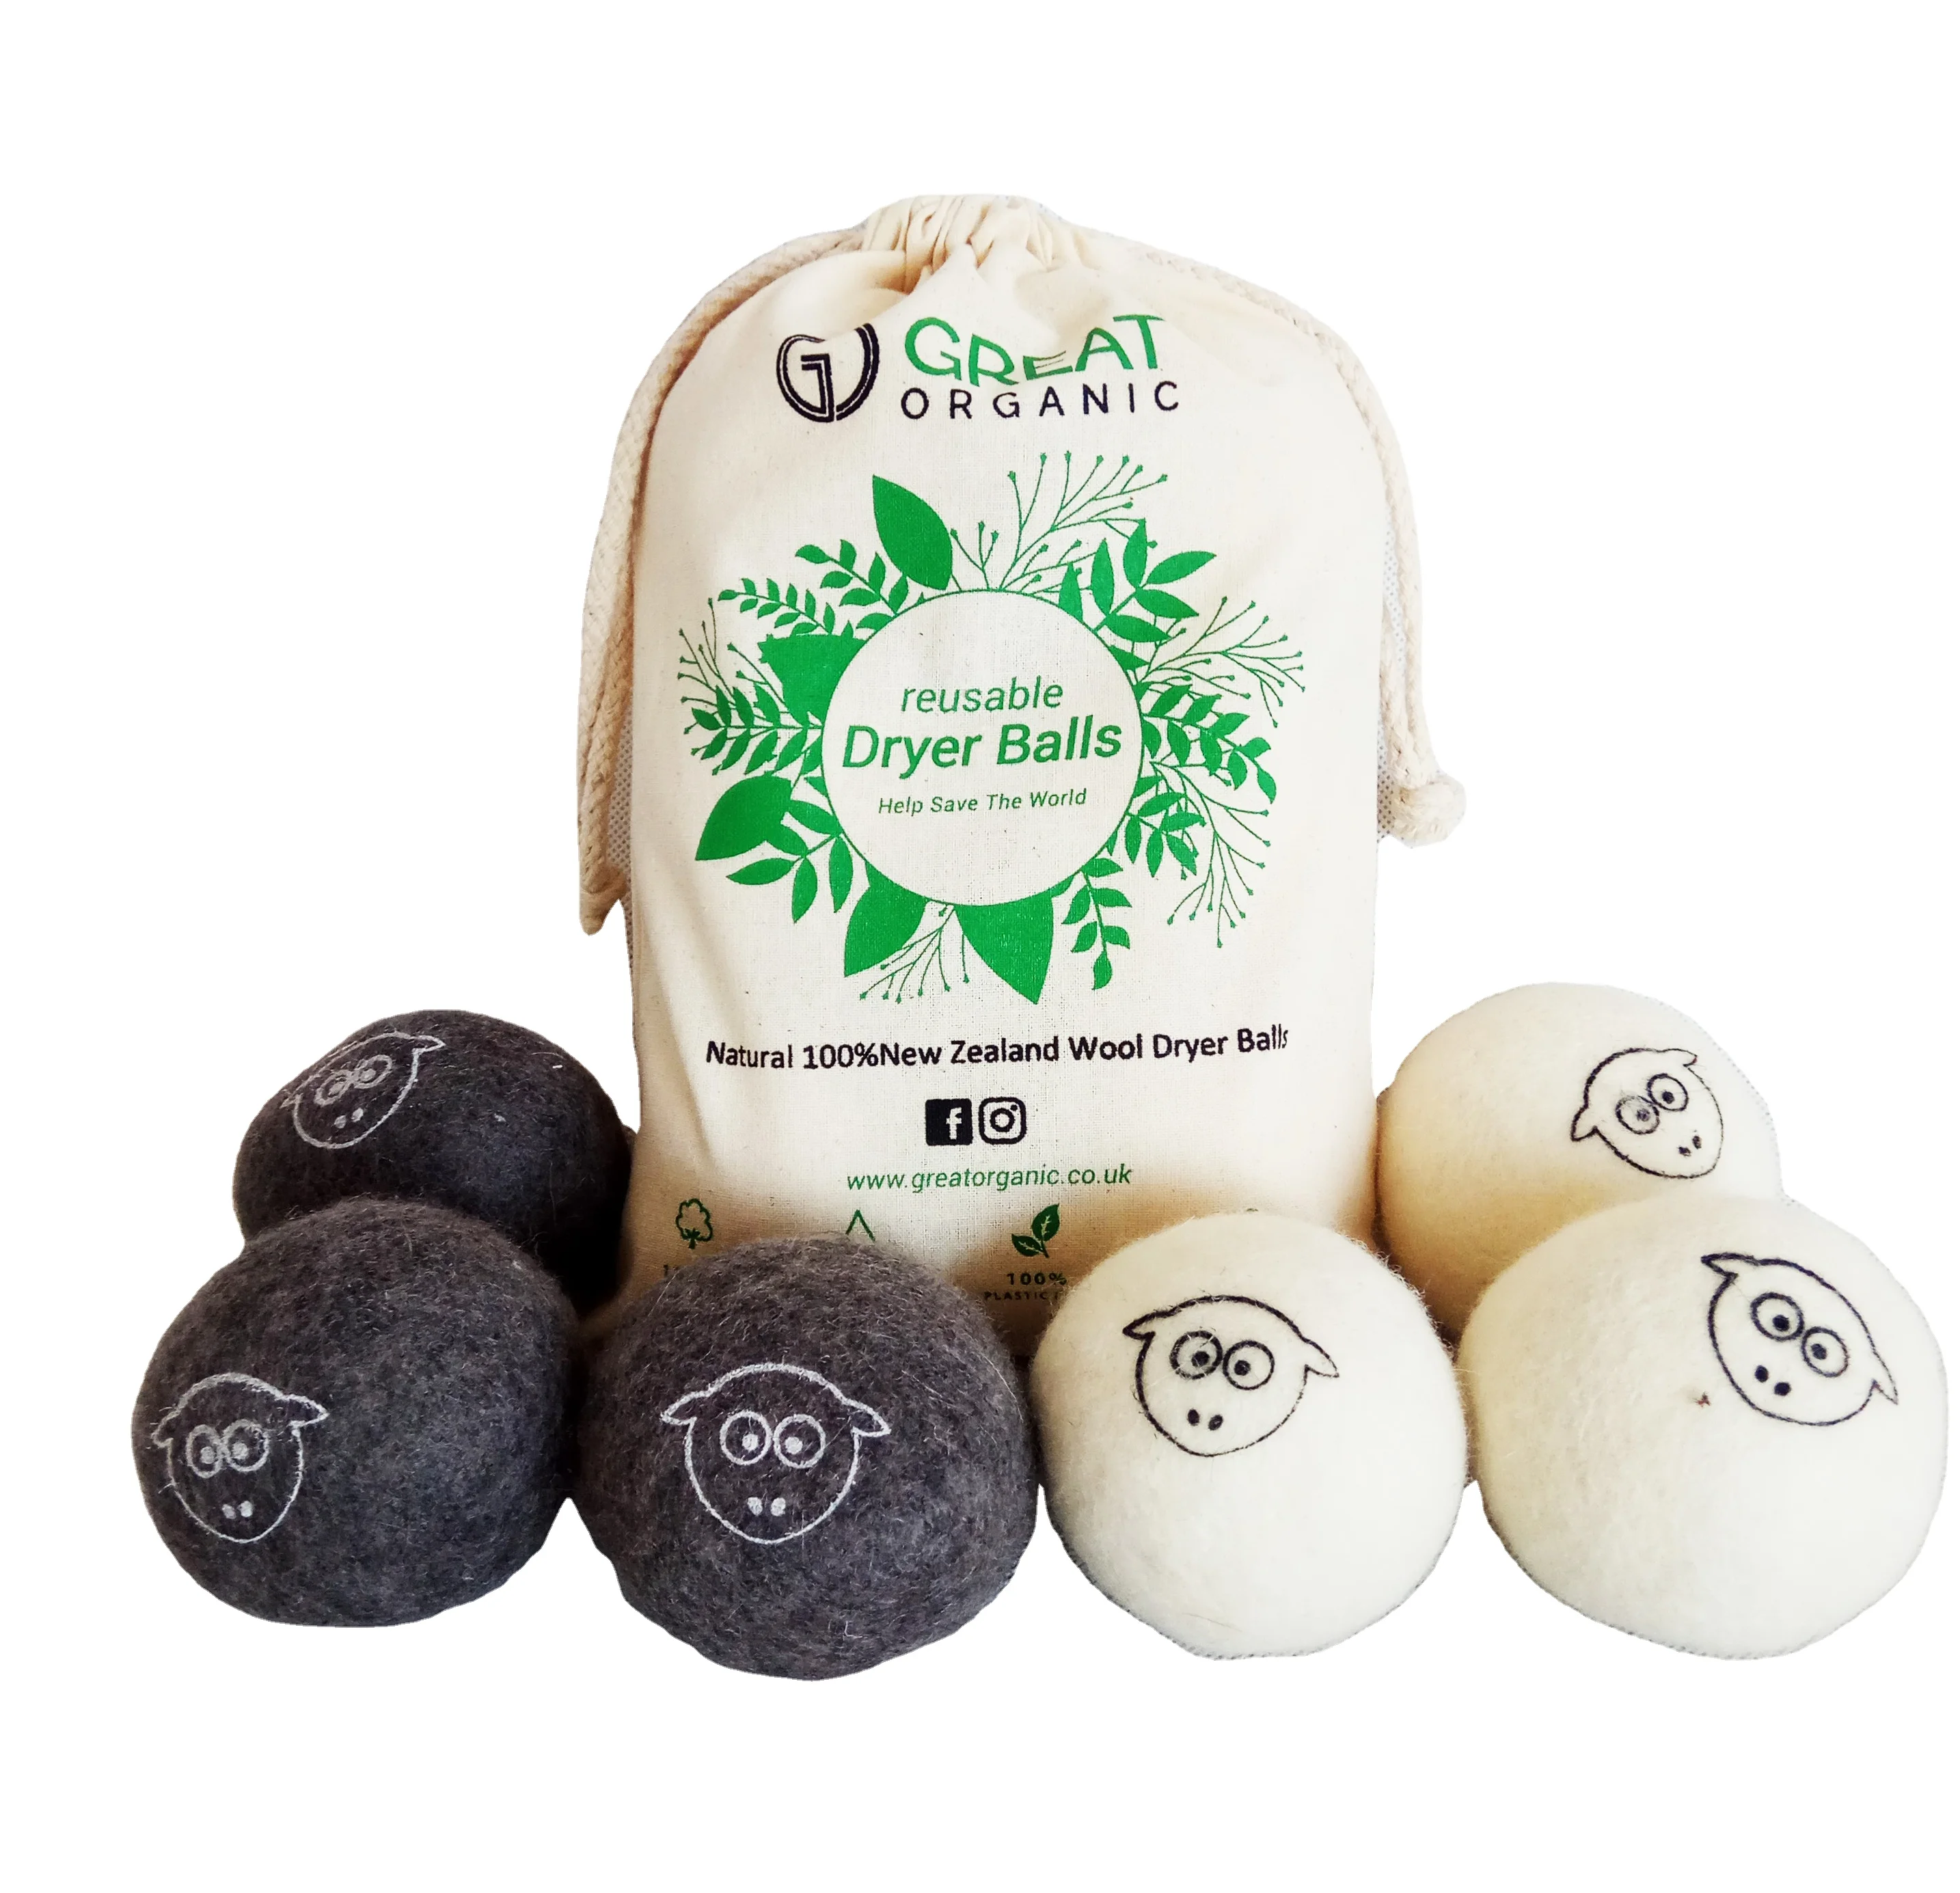 
Eco-Friendly Nepal Made Natural Fabric Softener Handmade 100% Organic Wool Dryer Balls (6 Pack) Natural and Unscented 